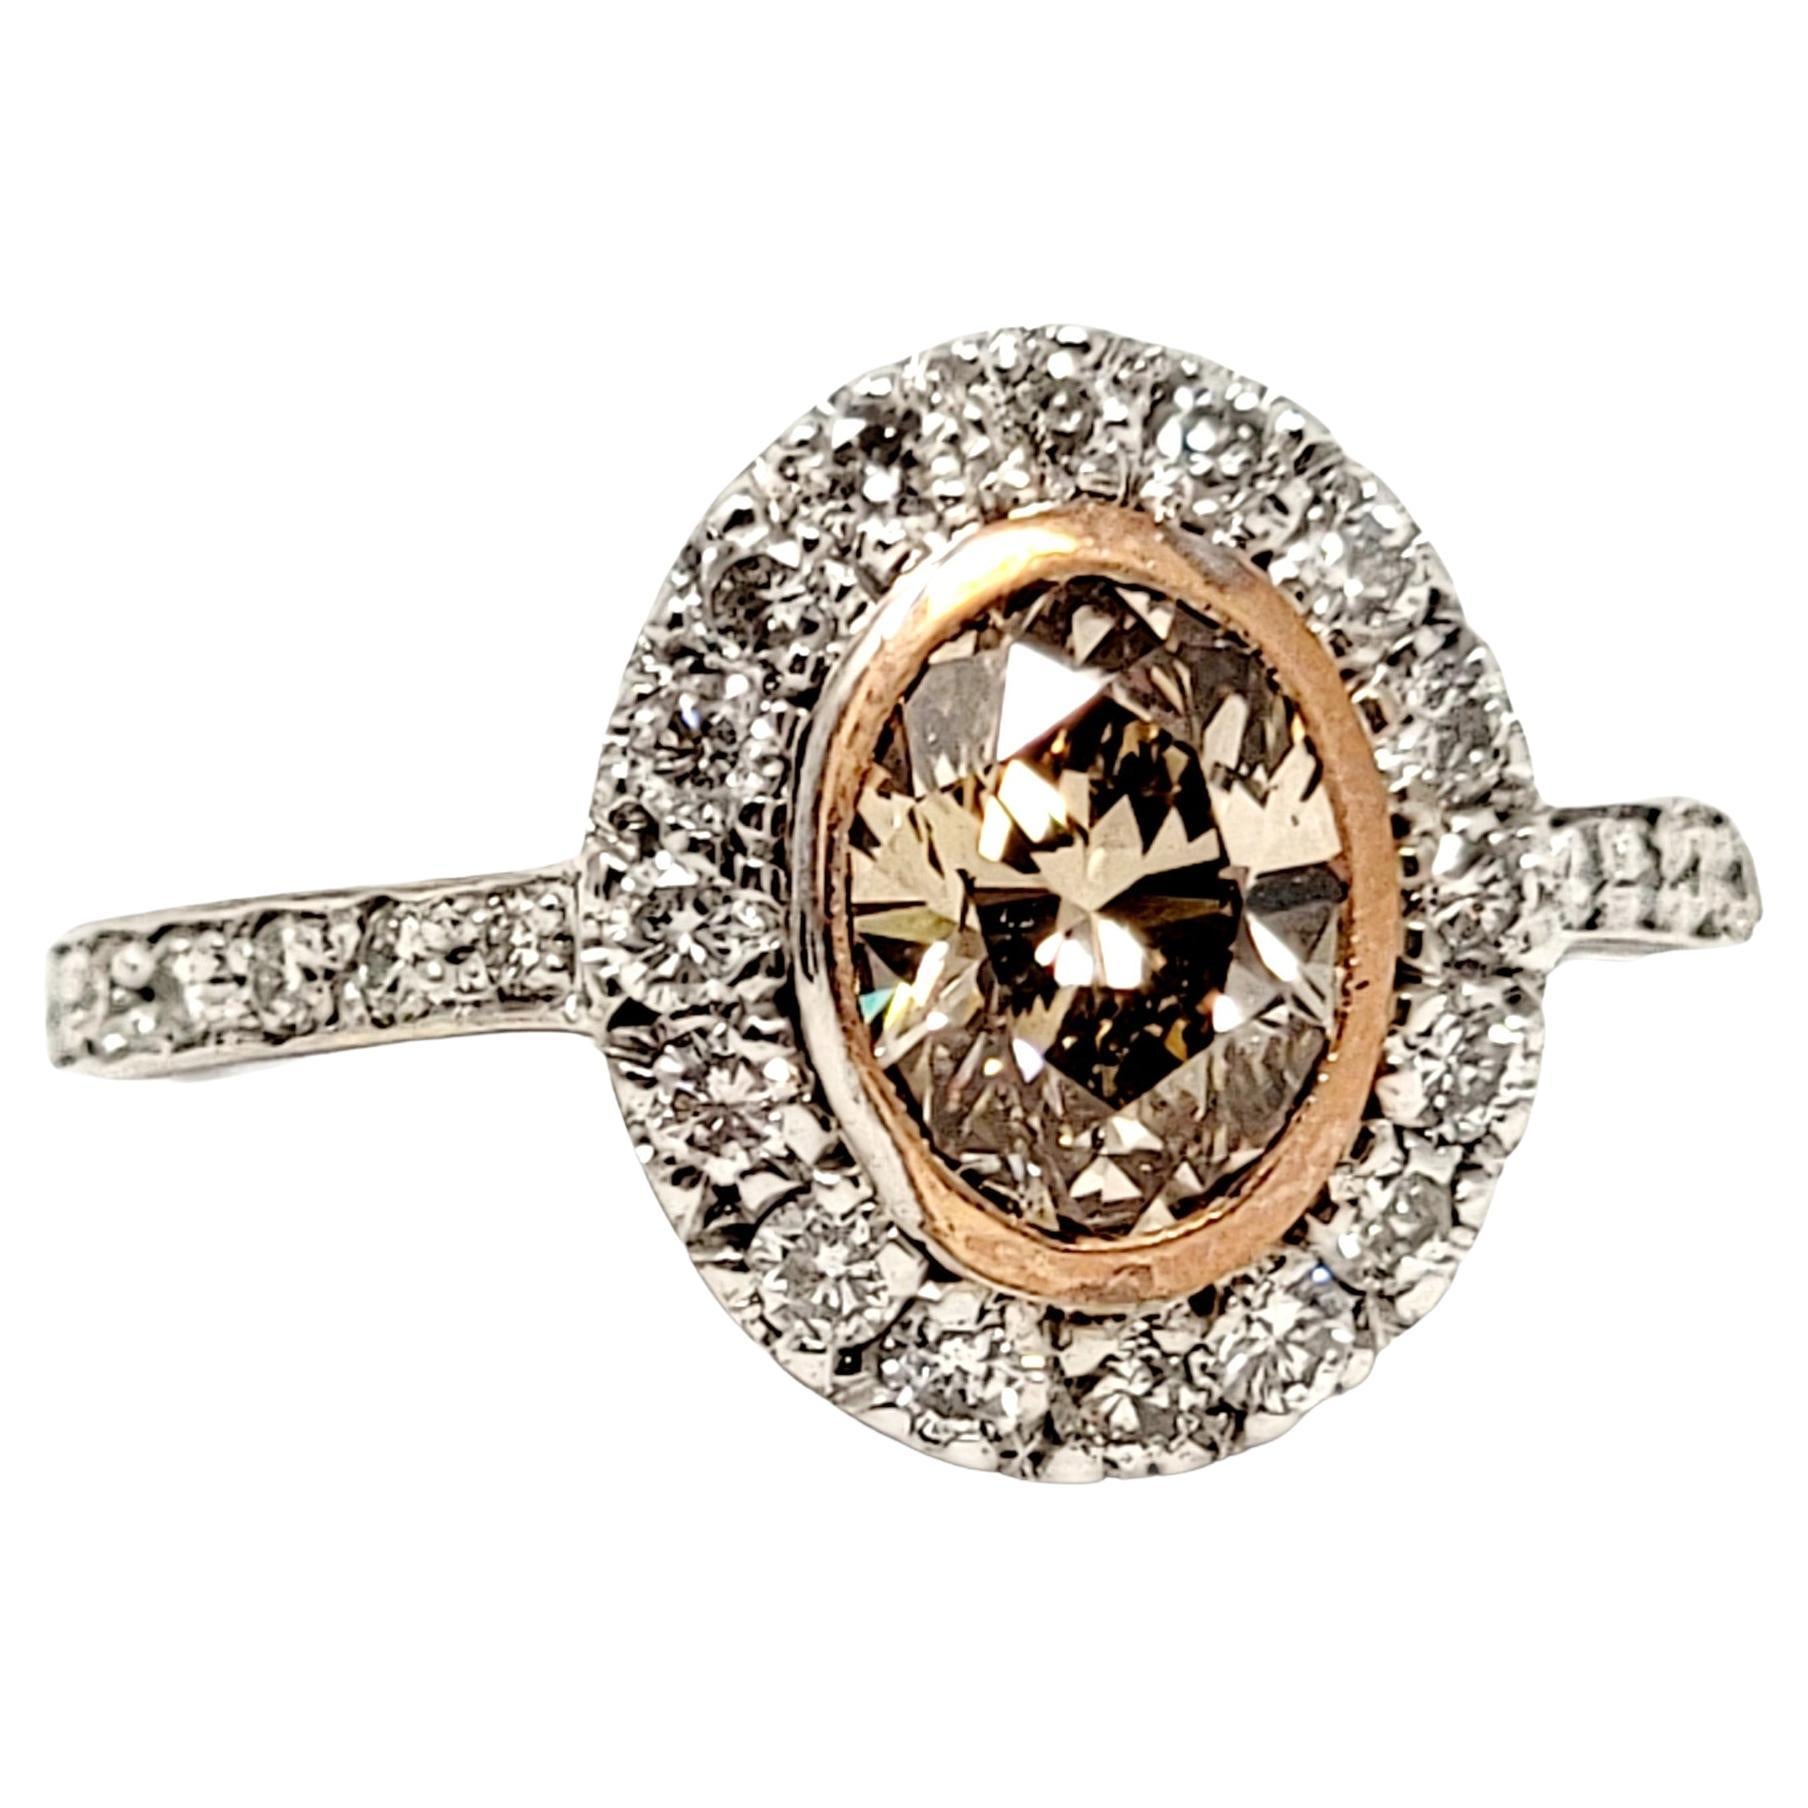 Oval Cut Champagne and White Diamond Halo Ring in Two-Tone 14 Karat Gold